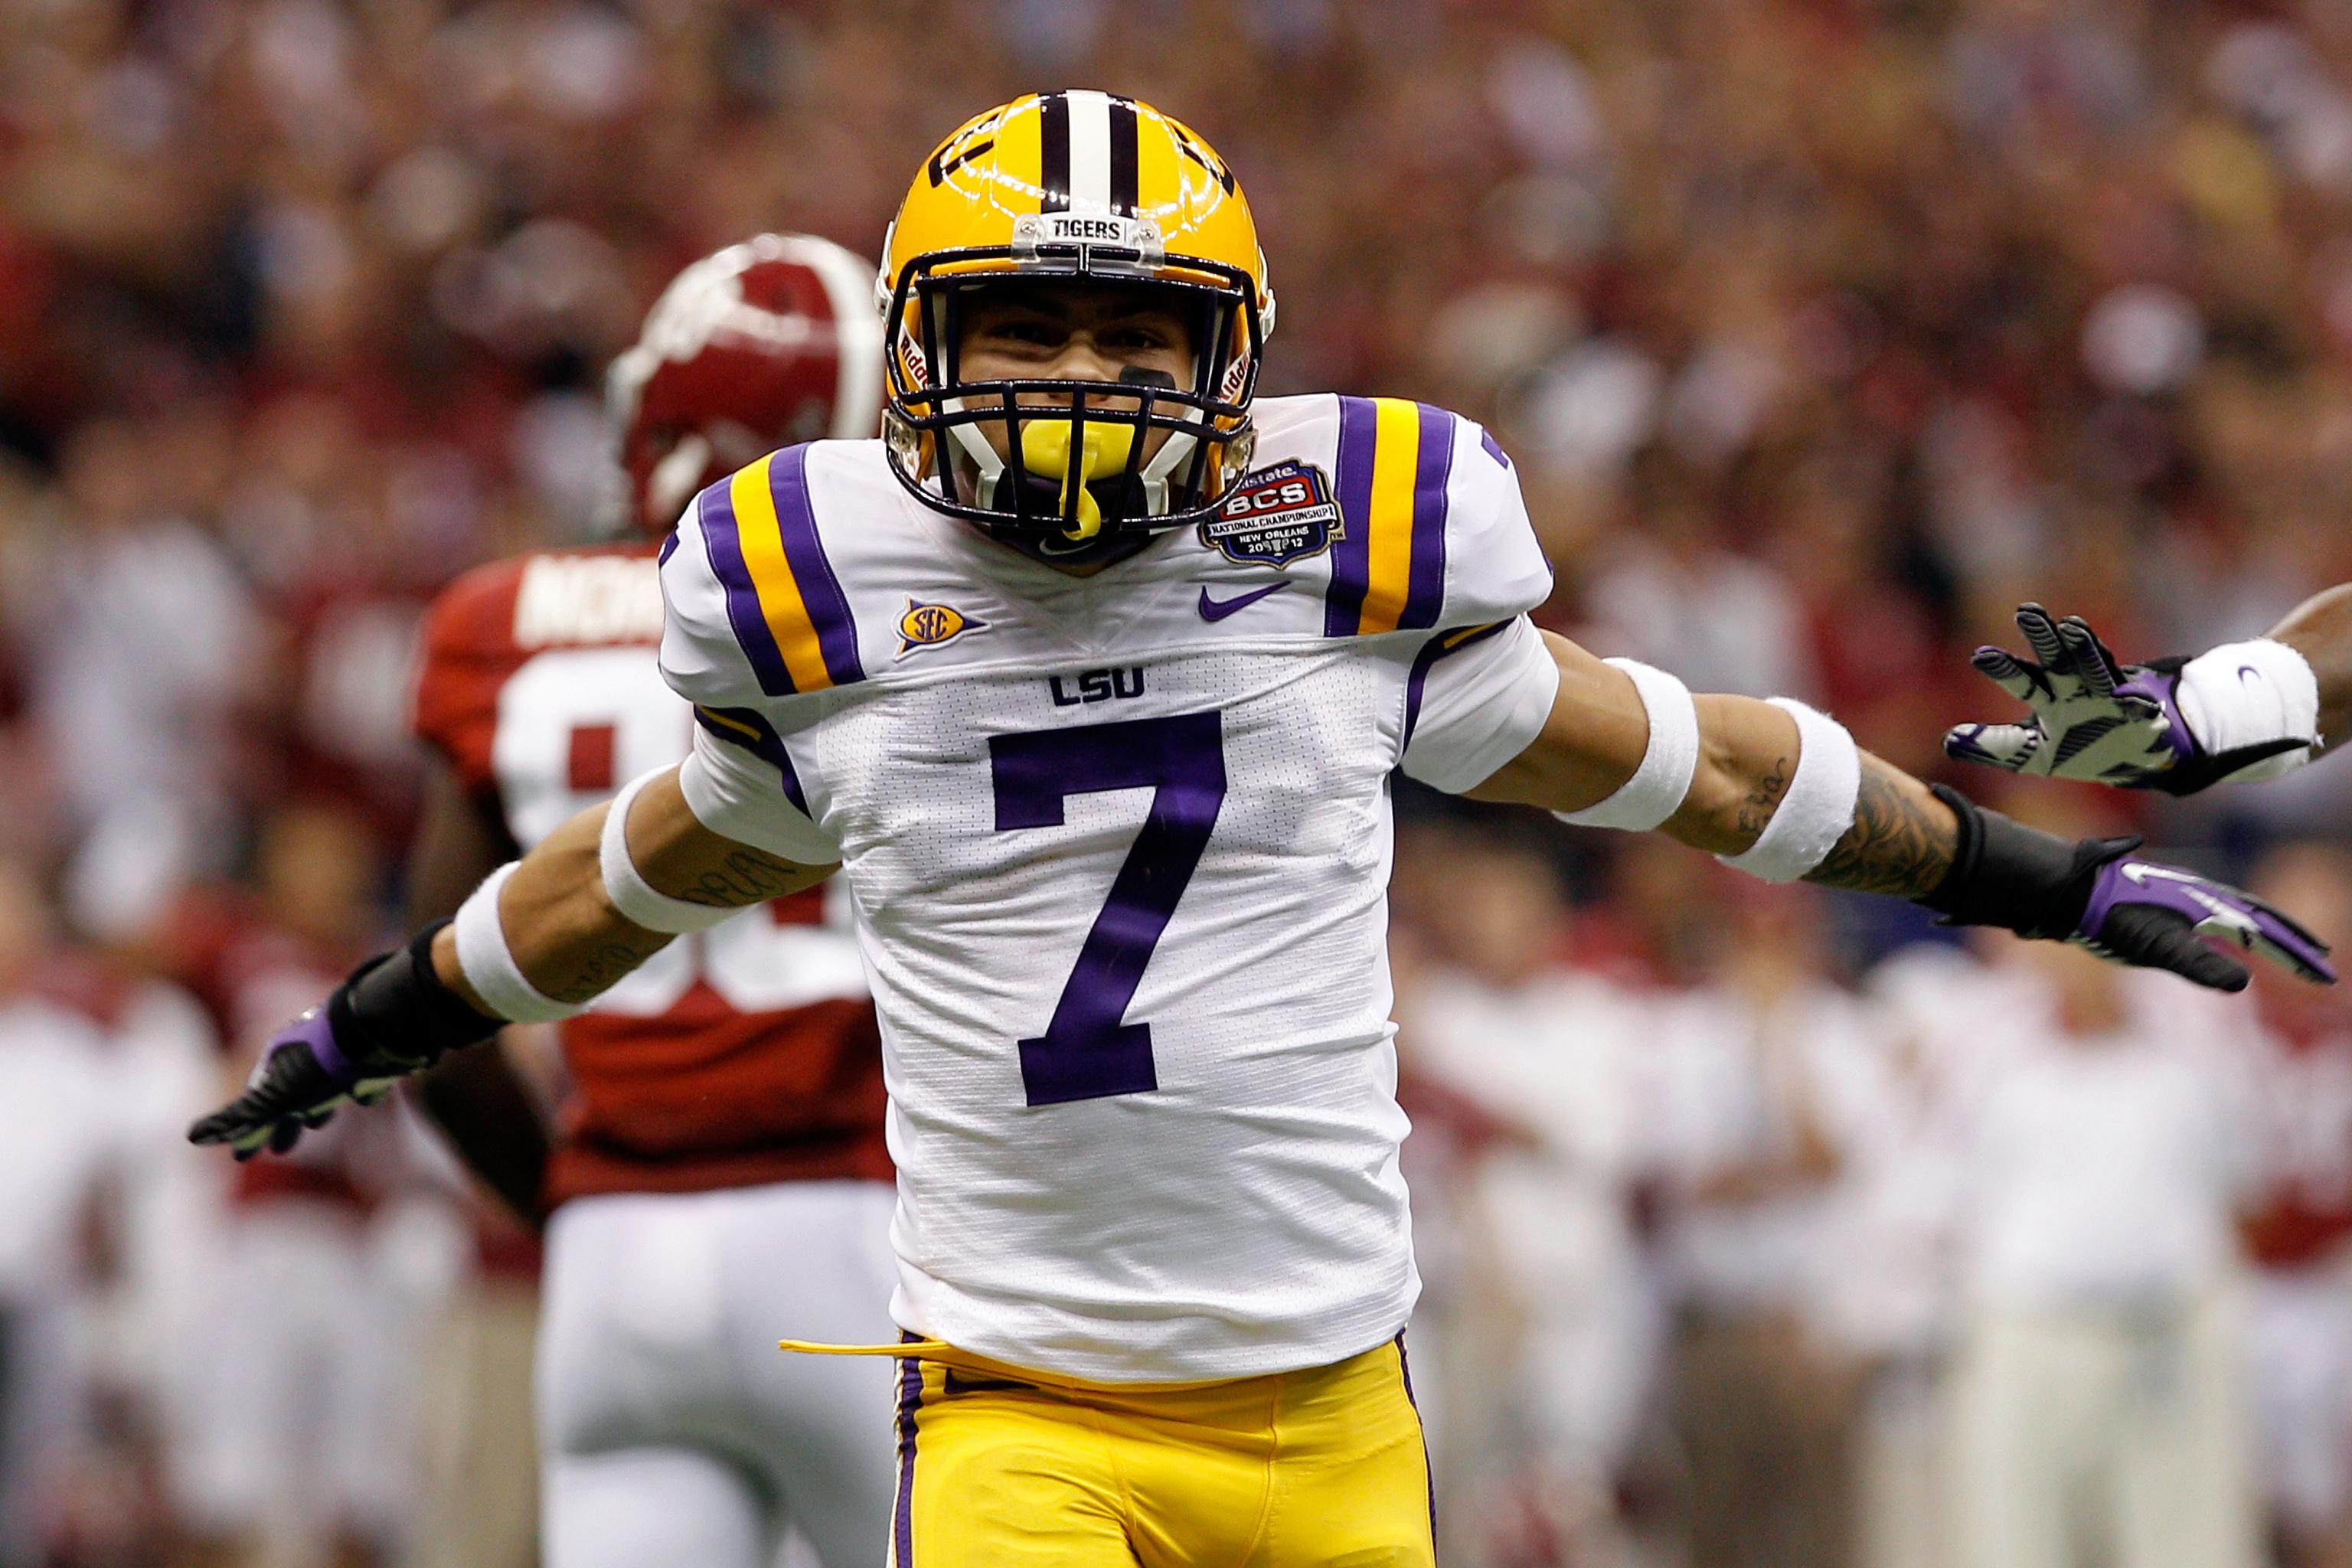 New Orleans taught Tyrann Mathieu to be a fighter. Now, he'll play